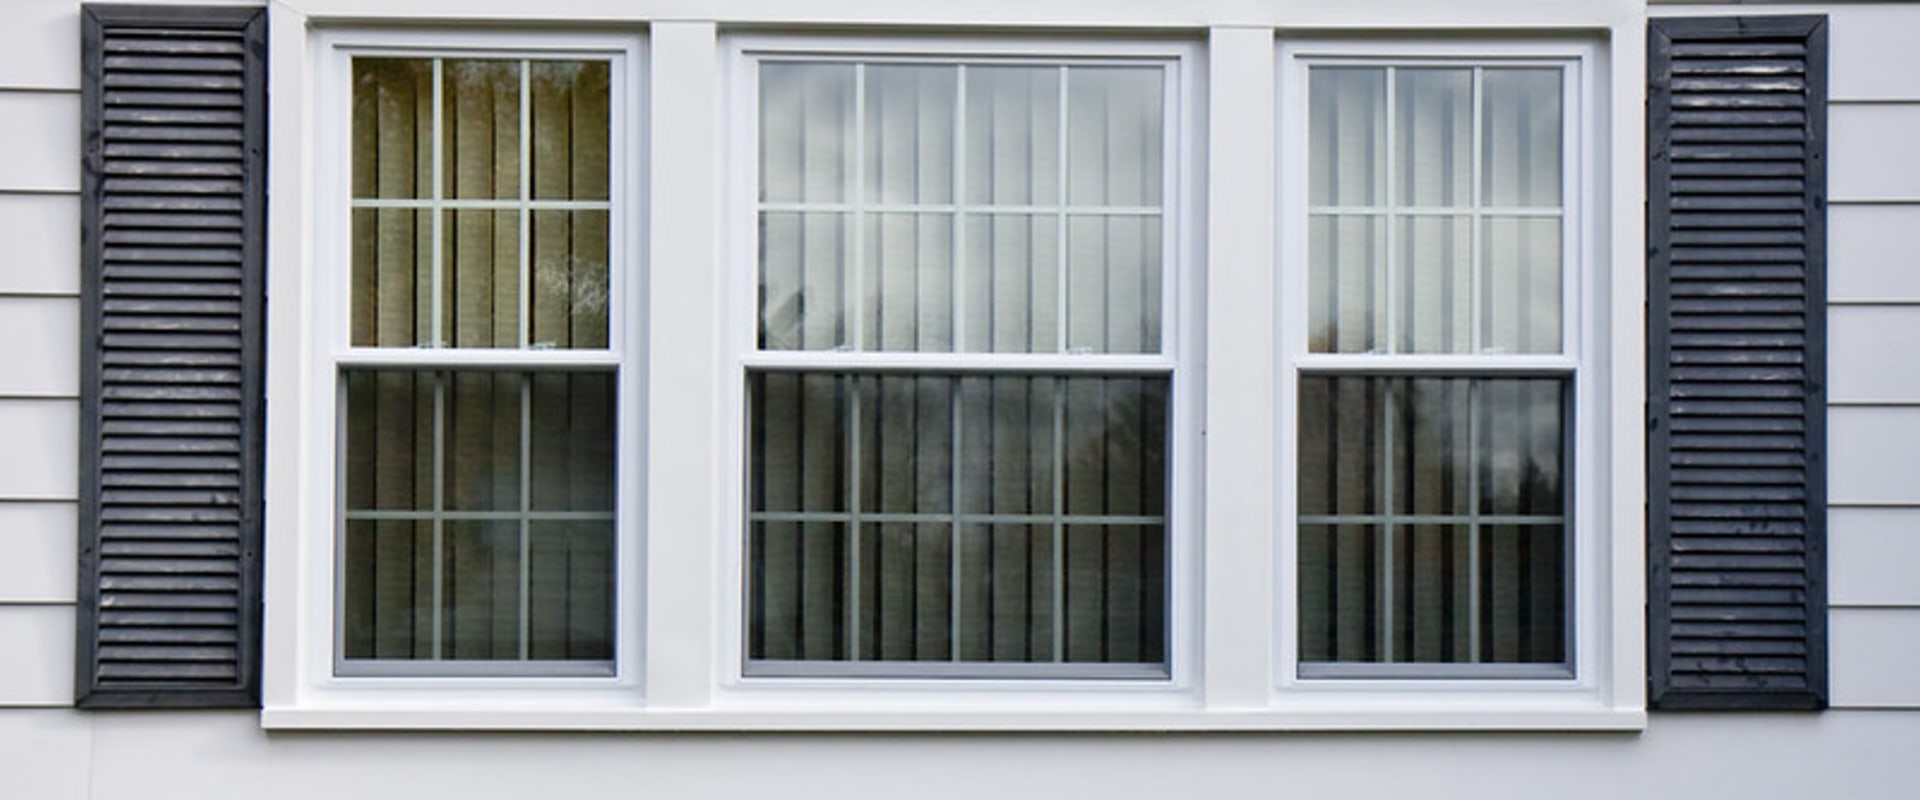 Upgrade Your Home With Double-Hung Windows: A Denver Remodeling Essential